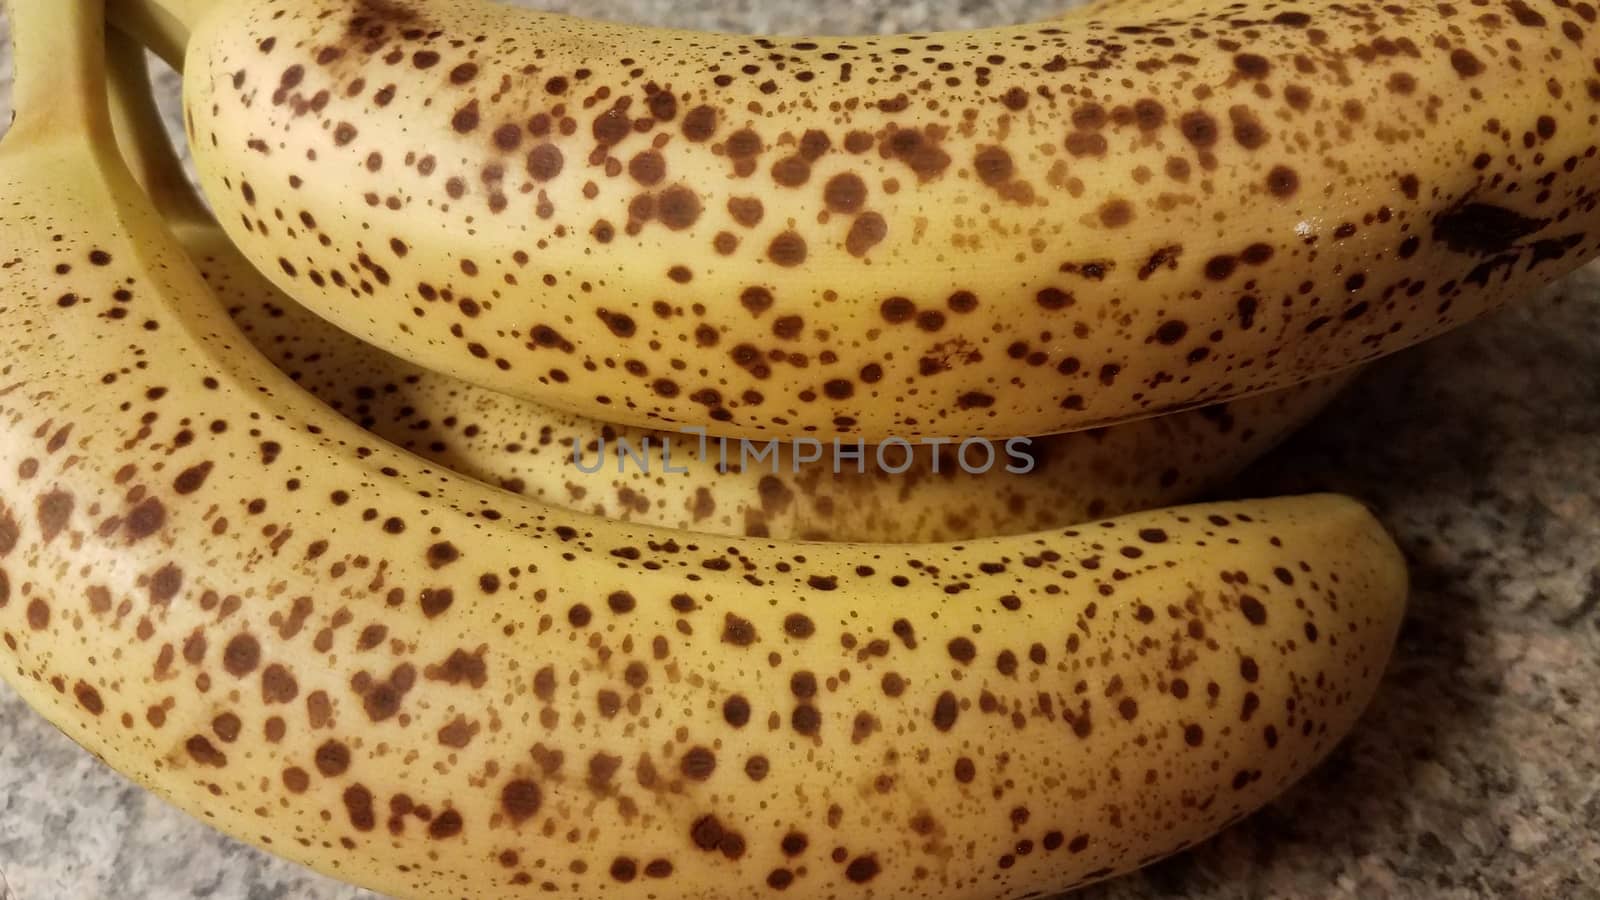 ripe banana fruit with spots on counter by stockphotofan1